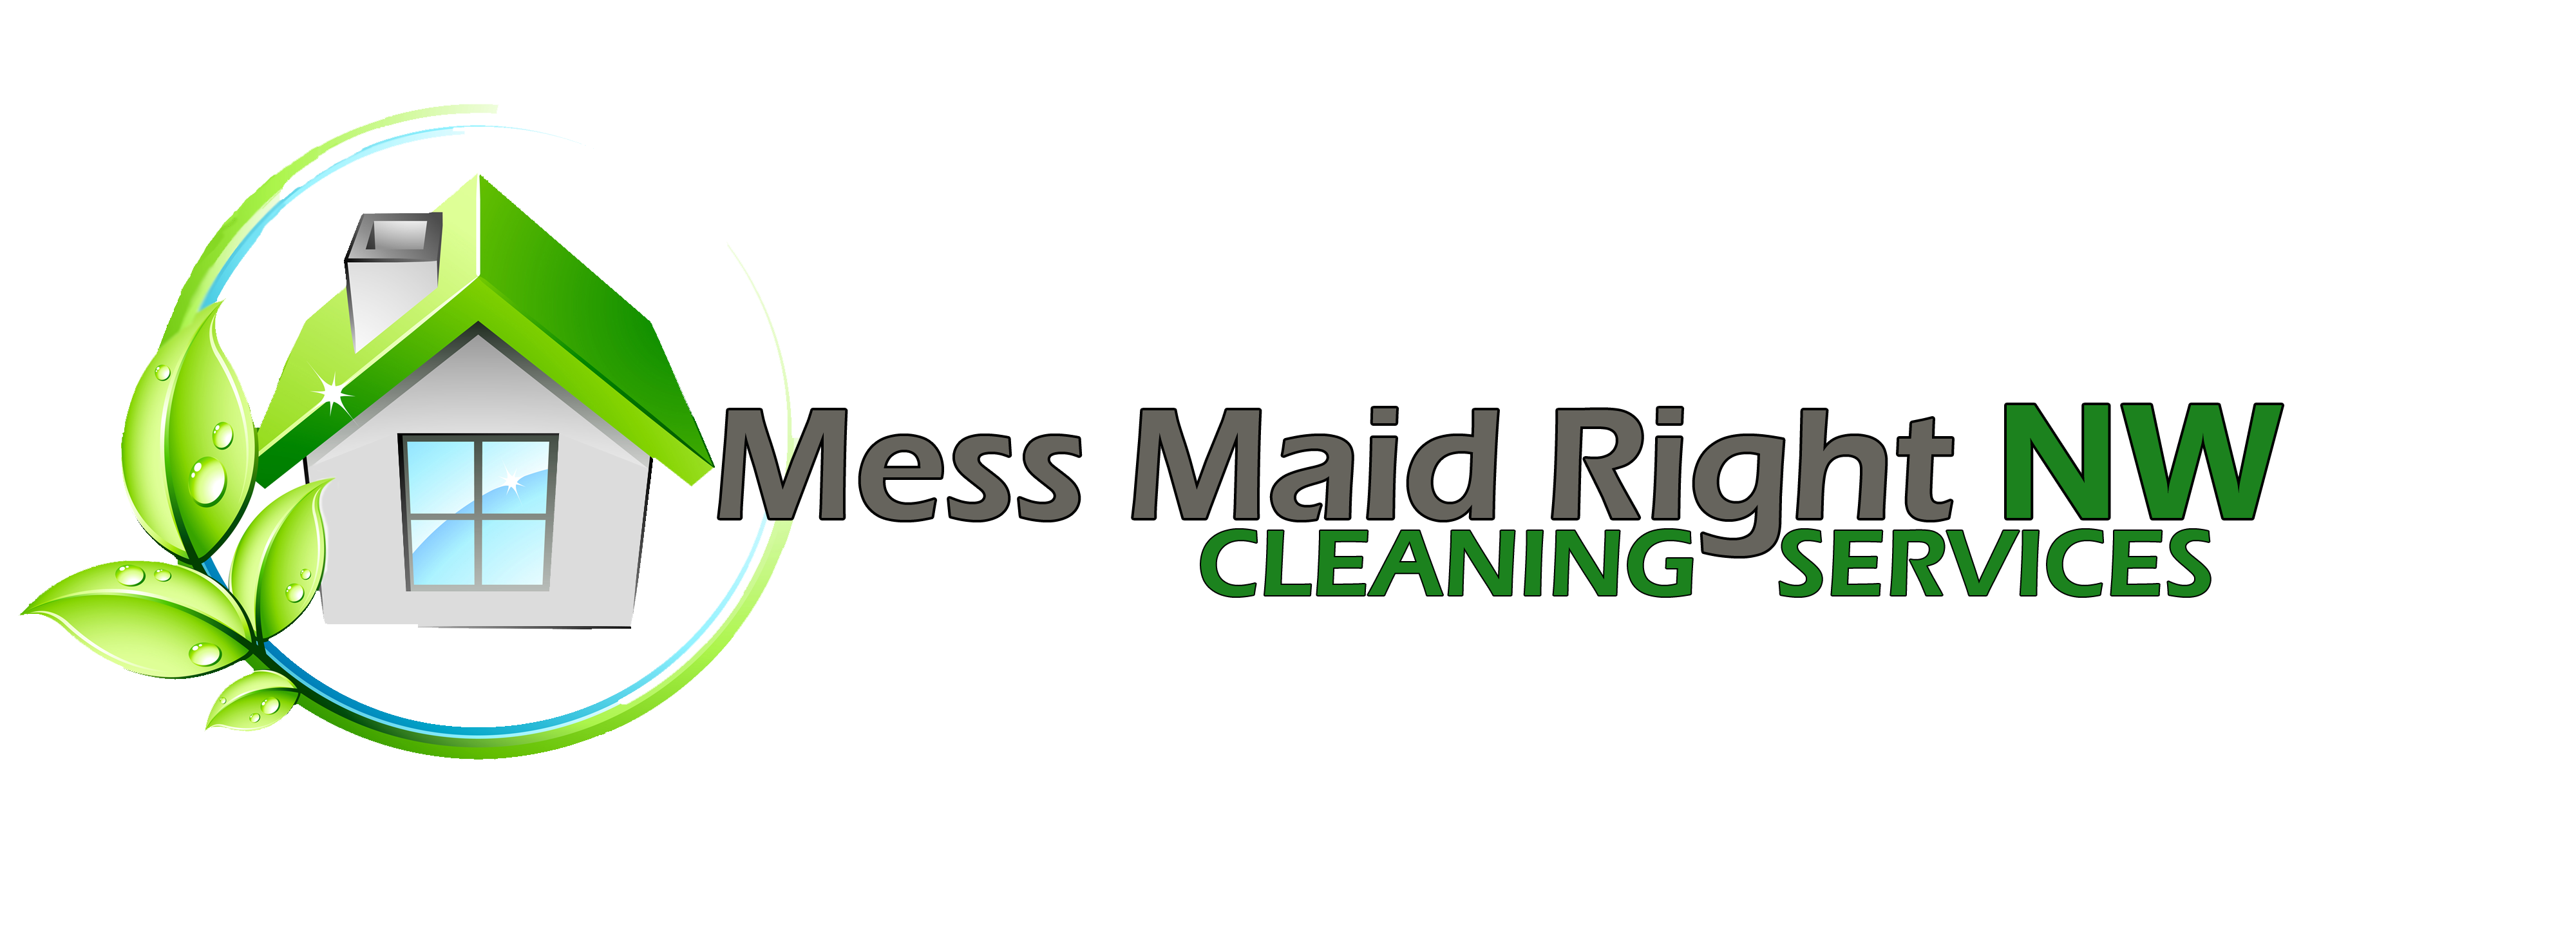 Mess Maid Right NW's Logo